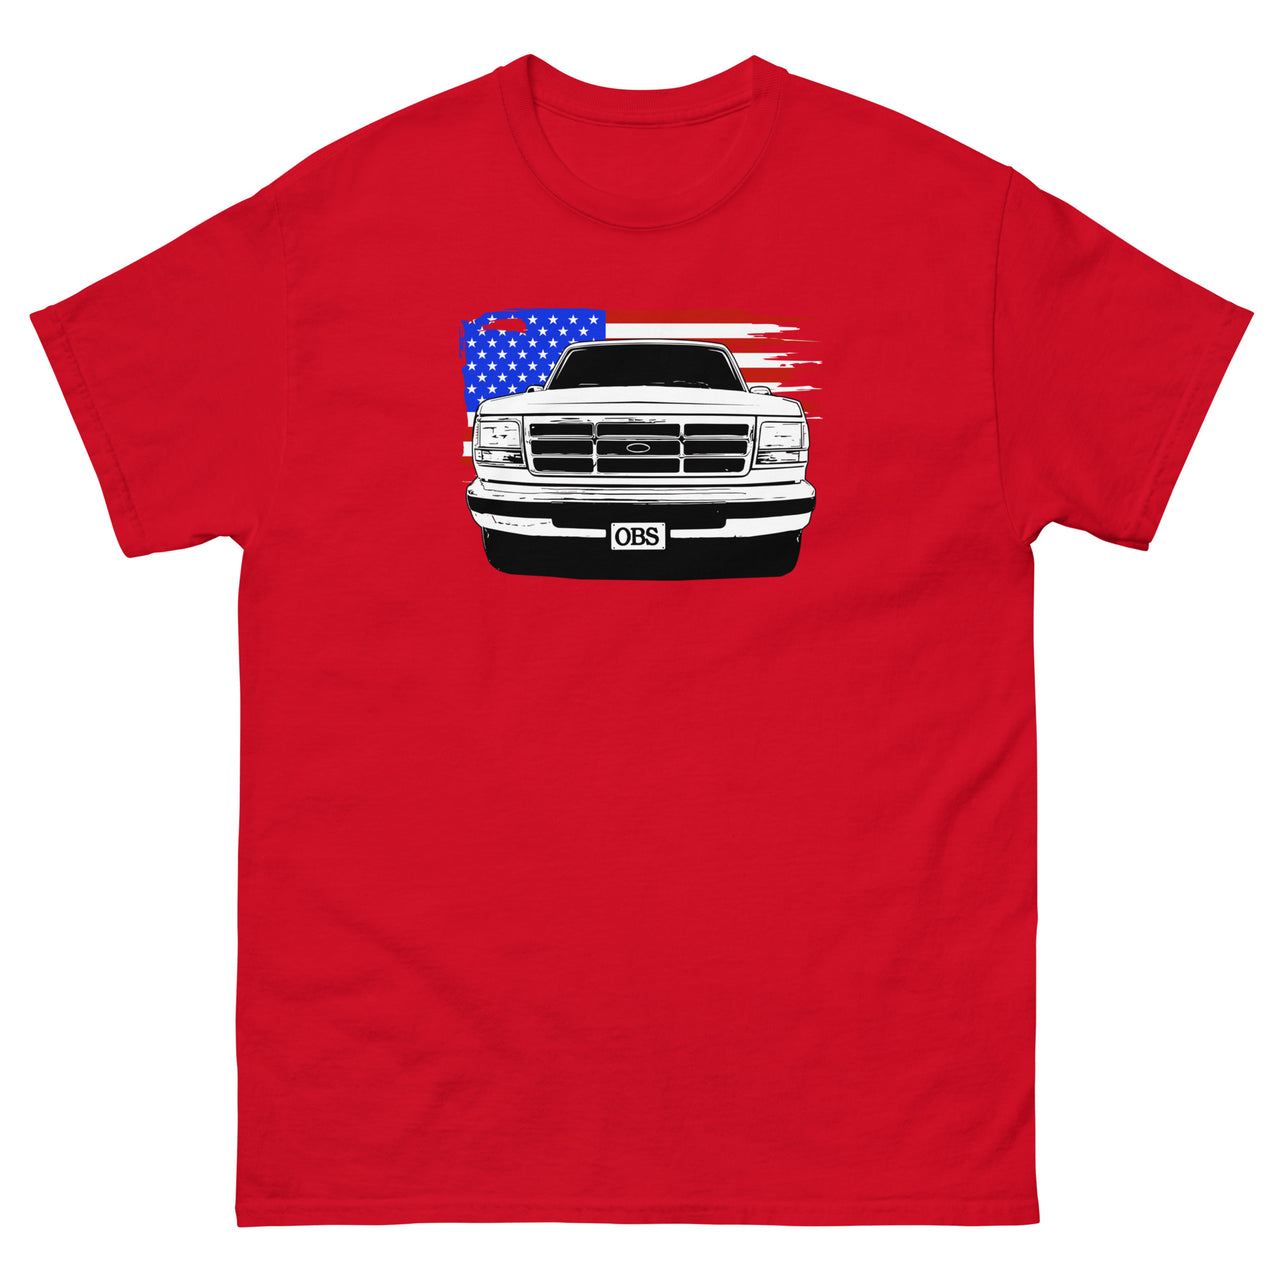 OBS Truck American Flag T-Shirt in red